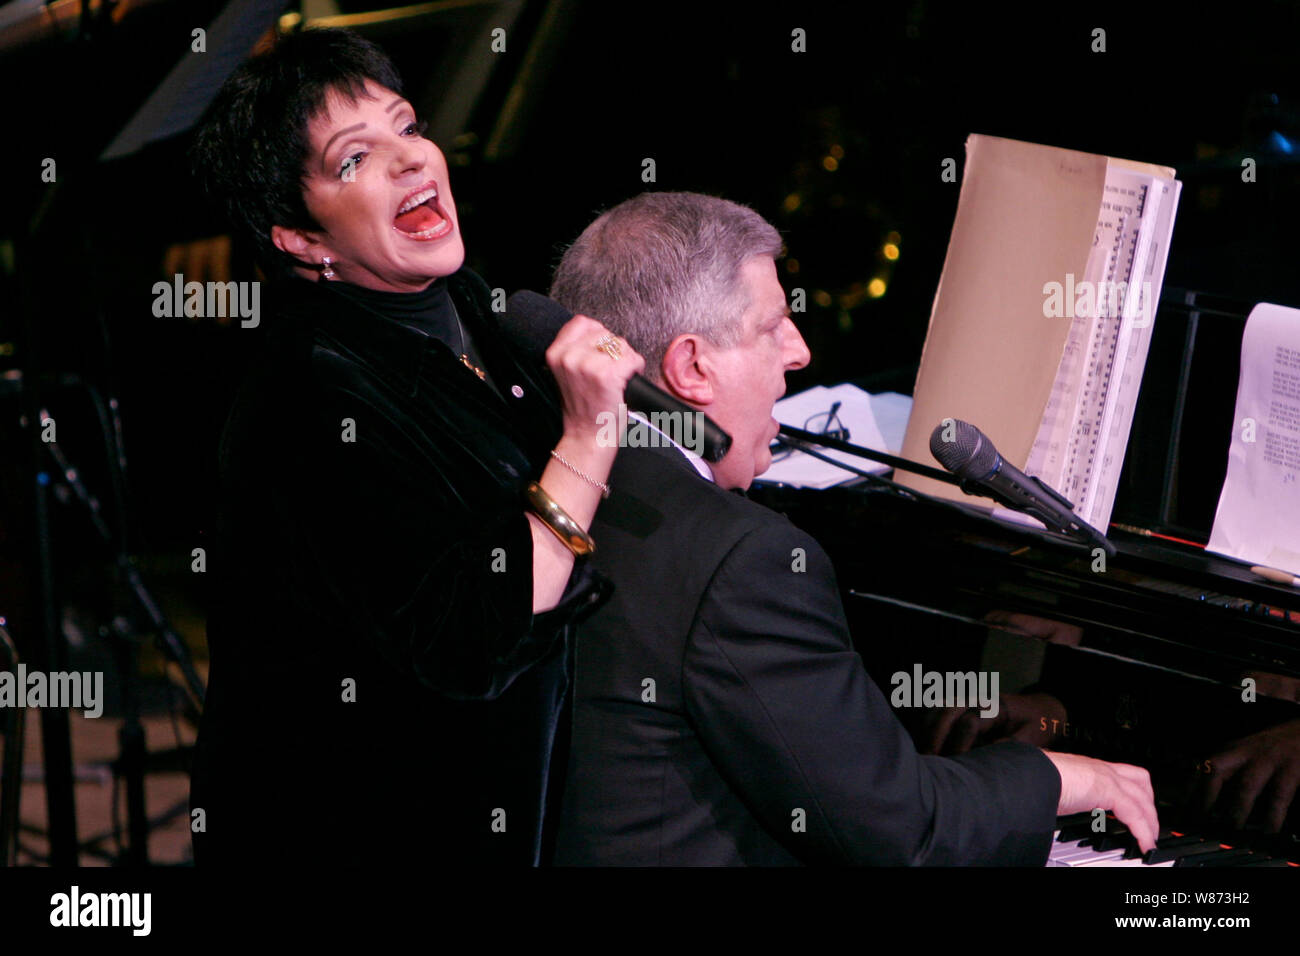 Liza Minelli sings accompanied by Marvin Hamlisch at a benefit concert at Carnegie Hall in New York City. Stock Photo